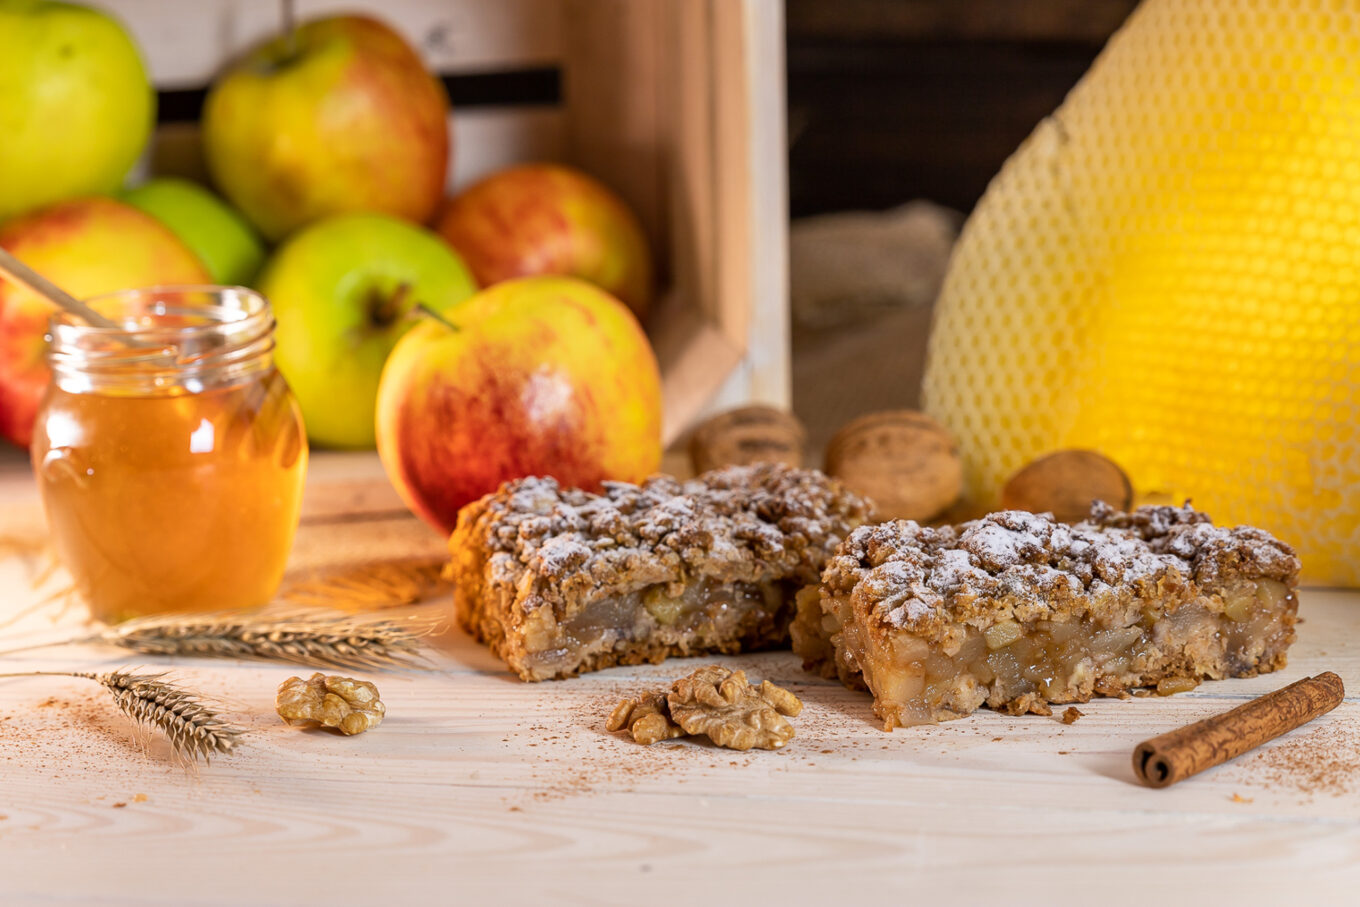 Luxurious apple pie based on wholemeal flour, confectionery shop Tricity, nuts, honey